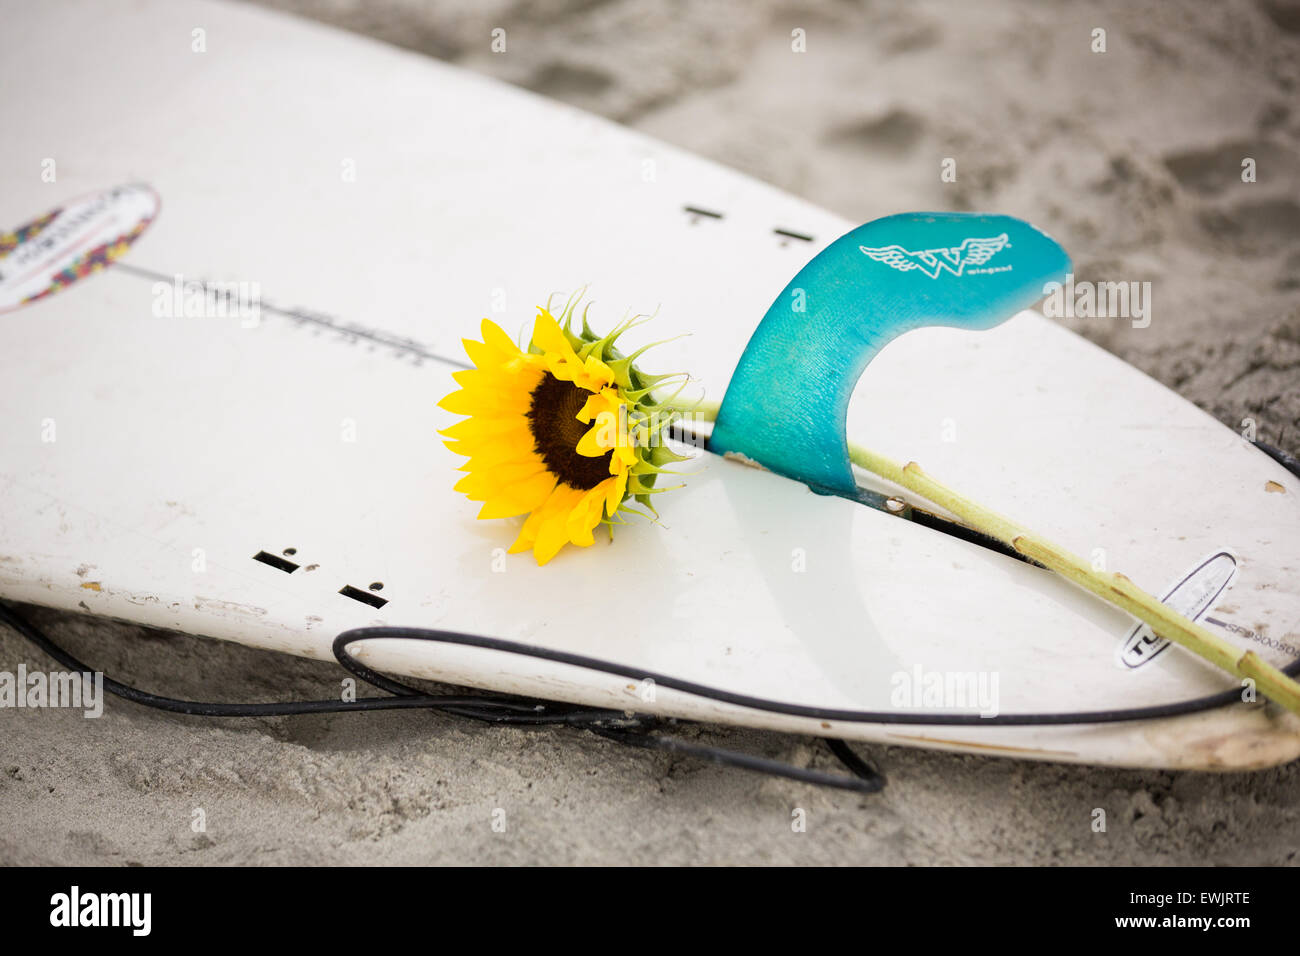 Folly beach, South Carolina, USA. 27th June, 2015. A flower sits on a surfboard as Charleston area surfers gather for a traditional memorial paddle out to honor and remember the nine people killed at the historic mother Emanuel African Methodist Episcopal Church June 27, 2015 in Folly Beach, South Carolina. Earlier in the week a white supremacist gunman killed 9 members at the historically black church. Stock Photo